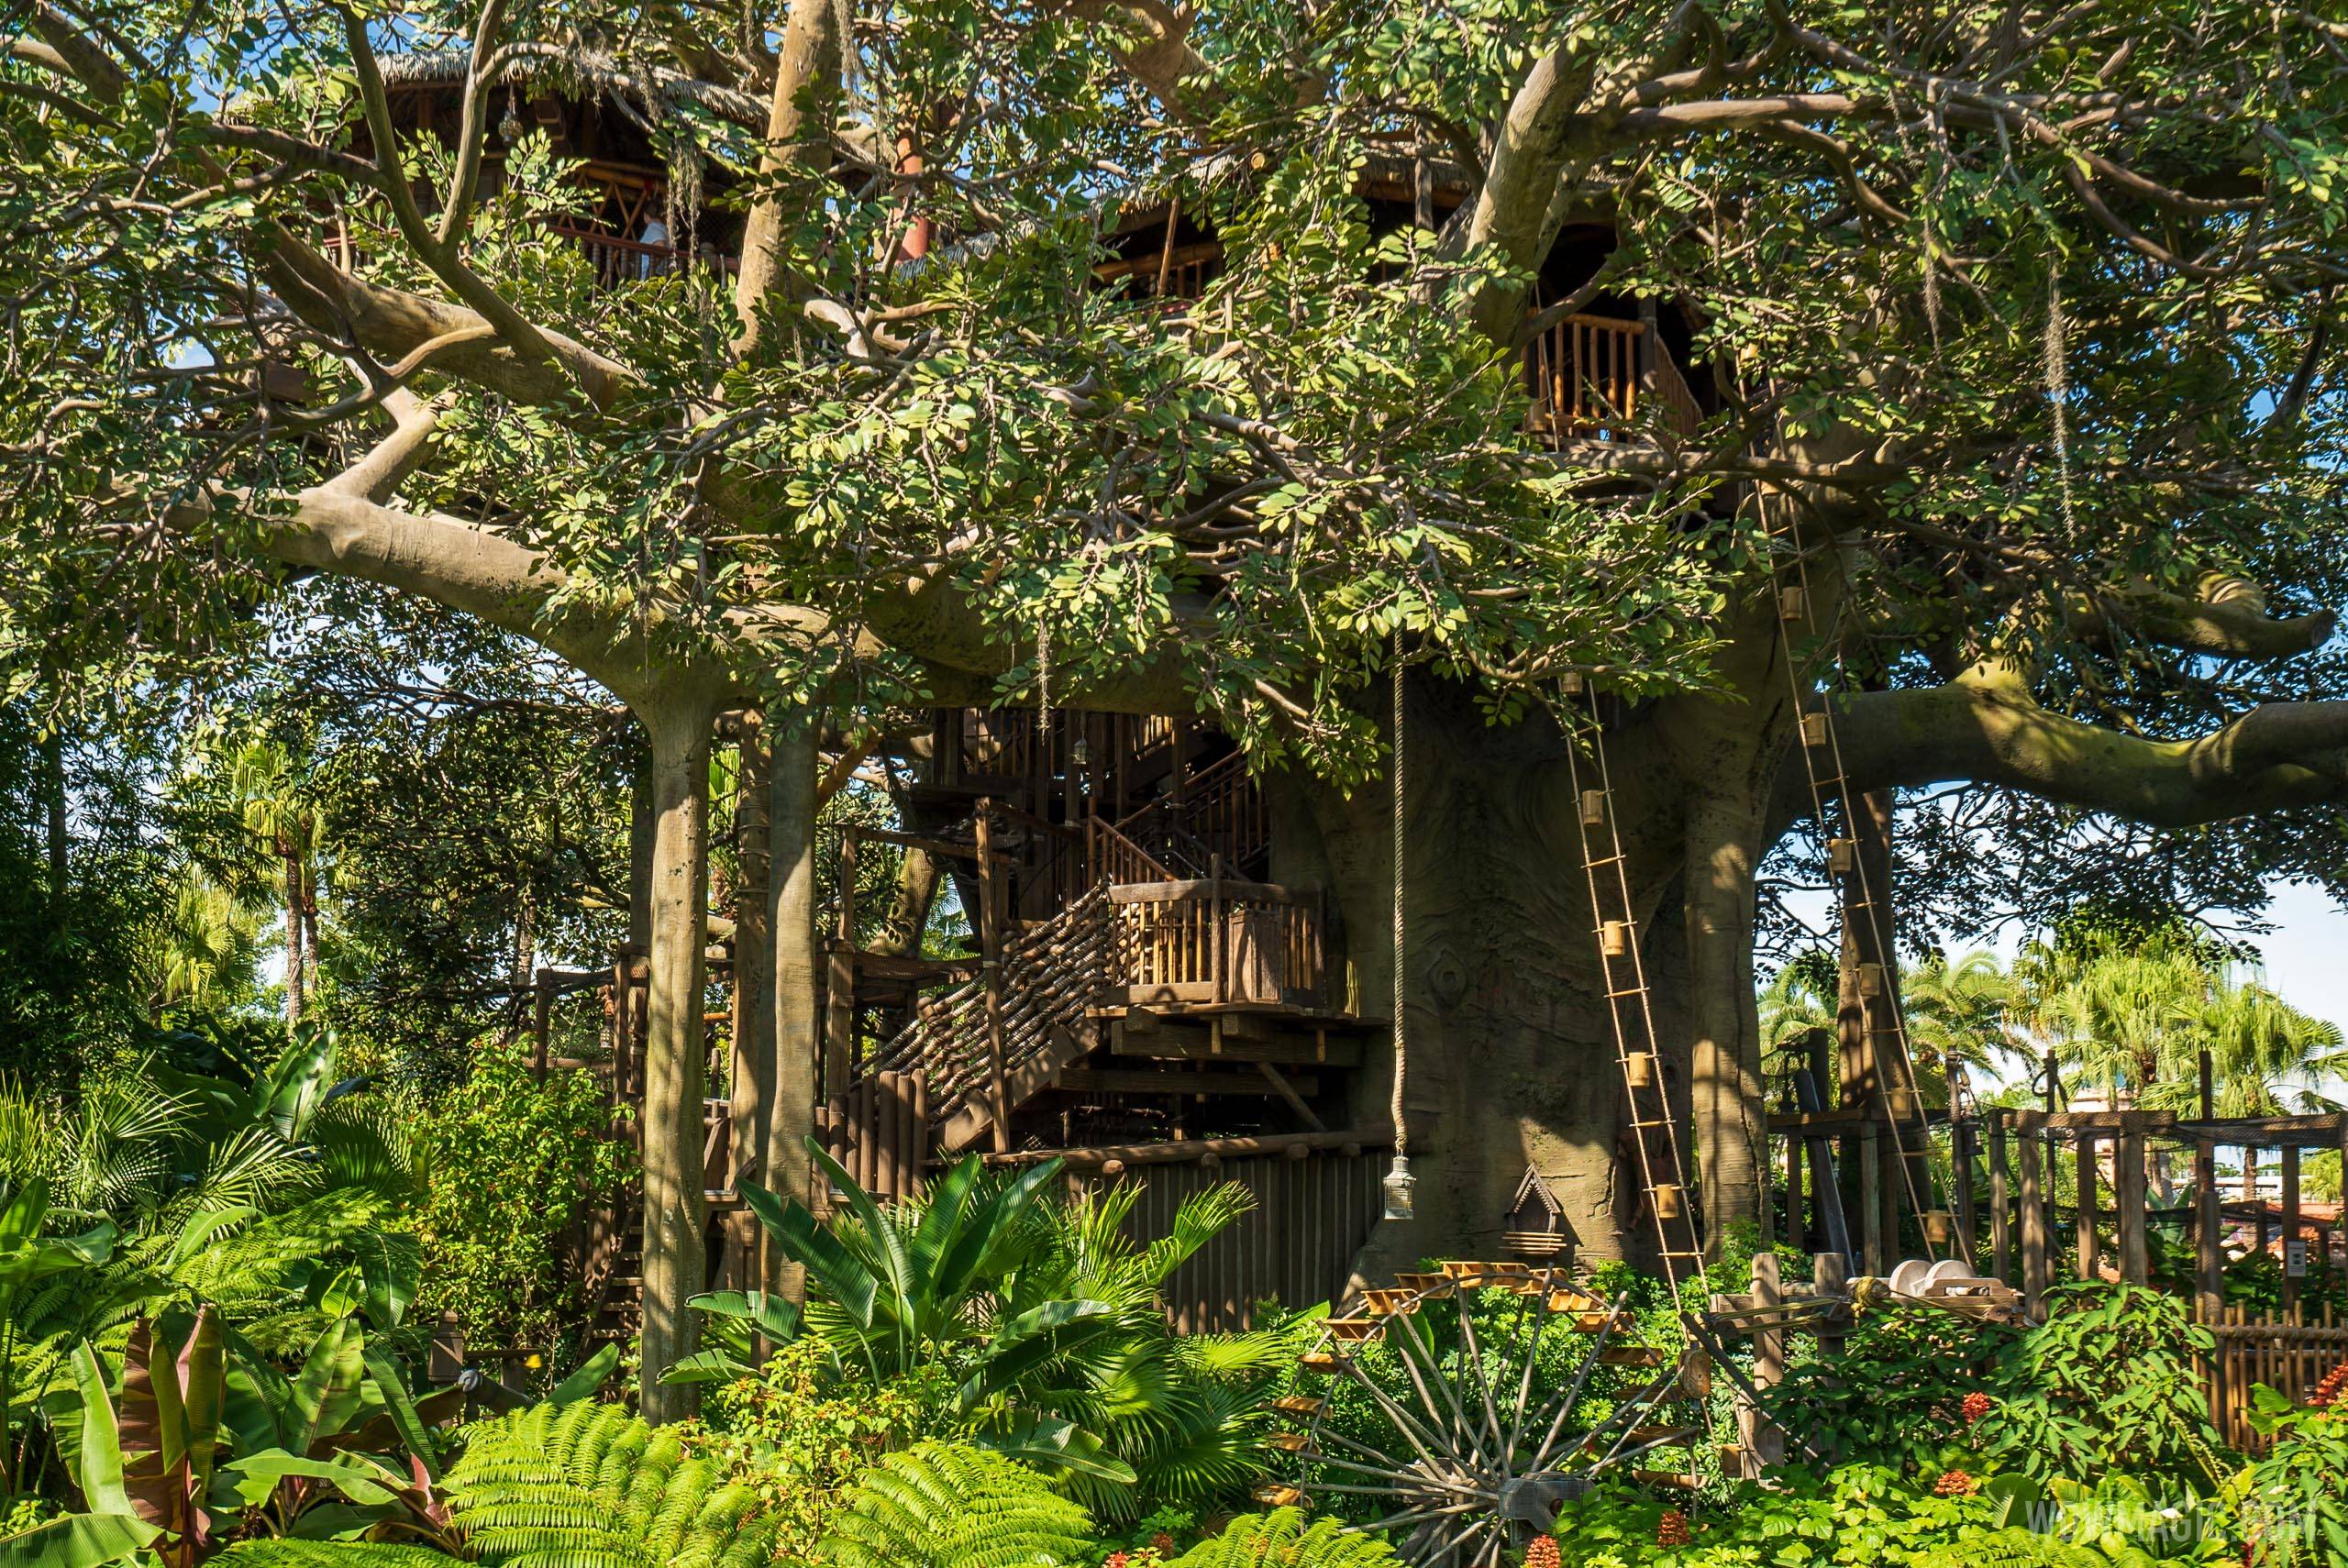 Highly detailed treehouse